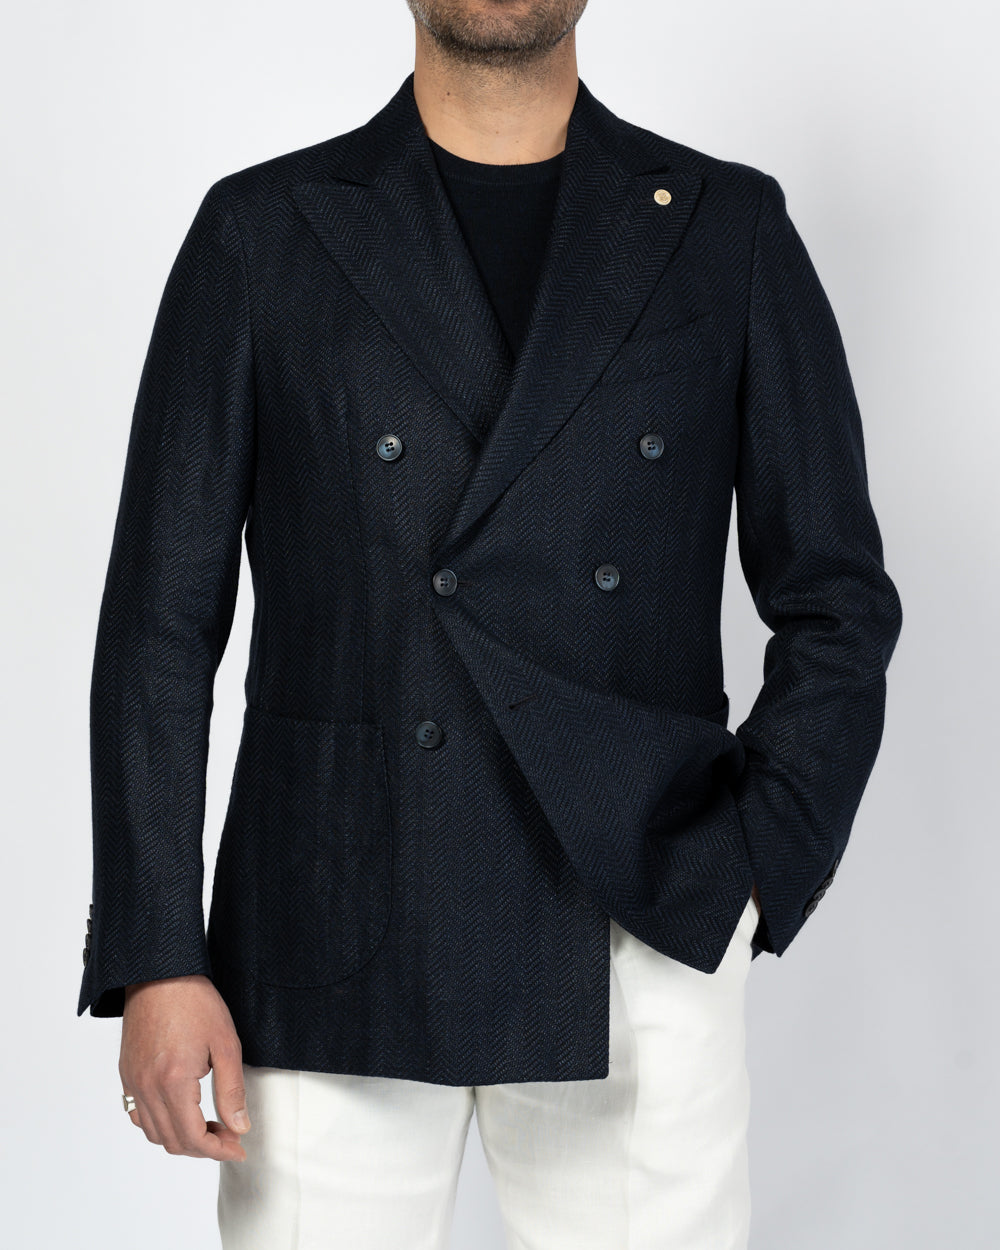 CAVALIERE - BEAU Dark Blue Double Breasted Linen and Wool Jaacket